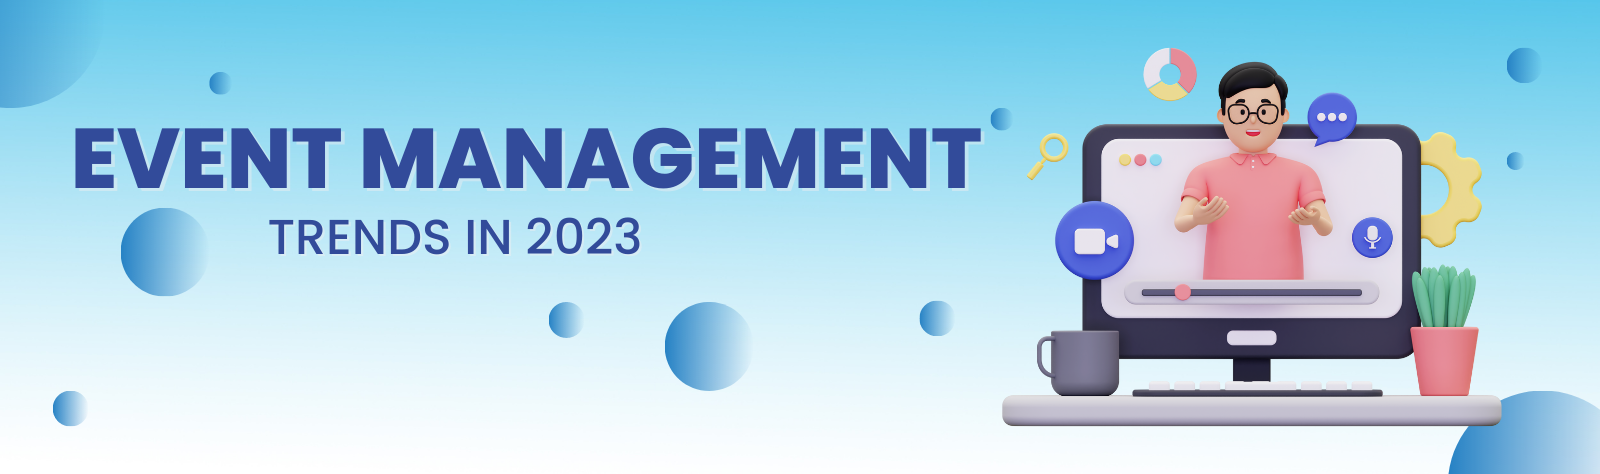 Event Management trends in 2023